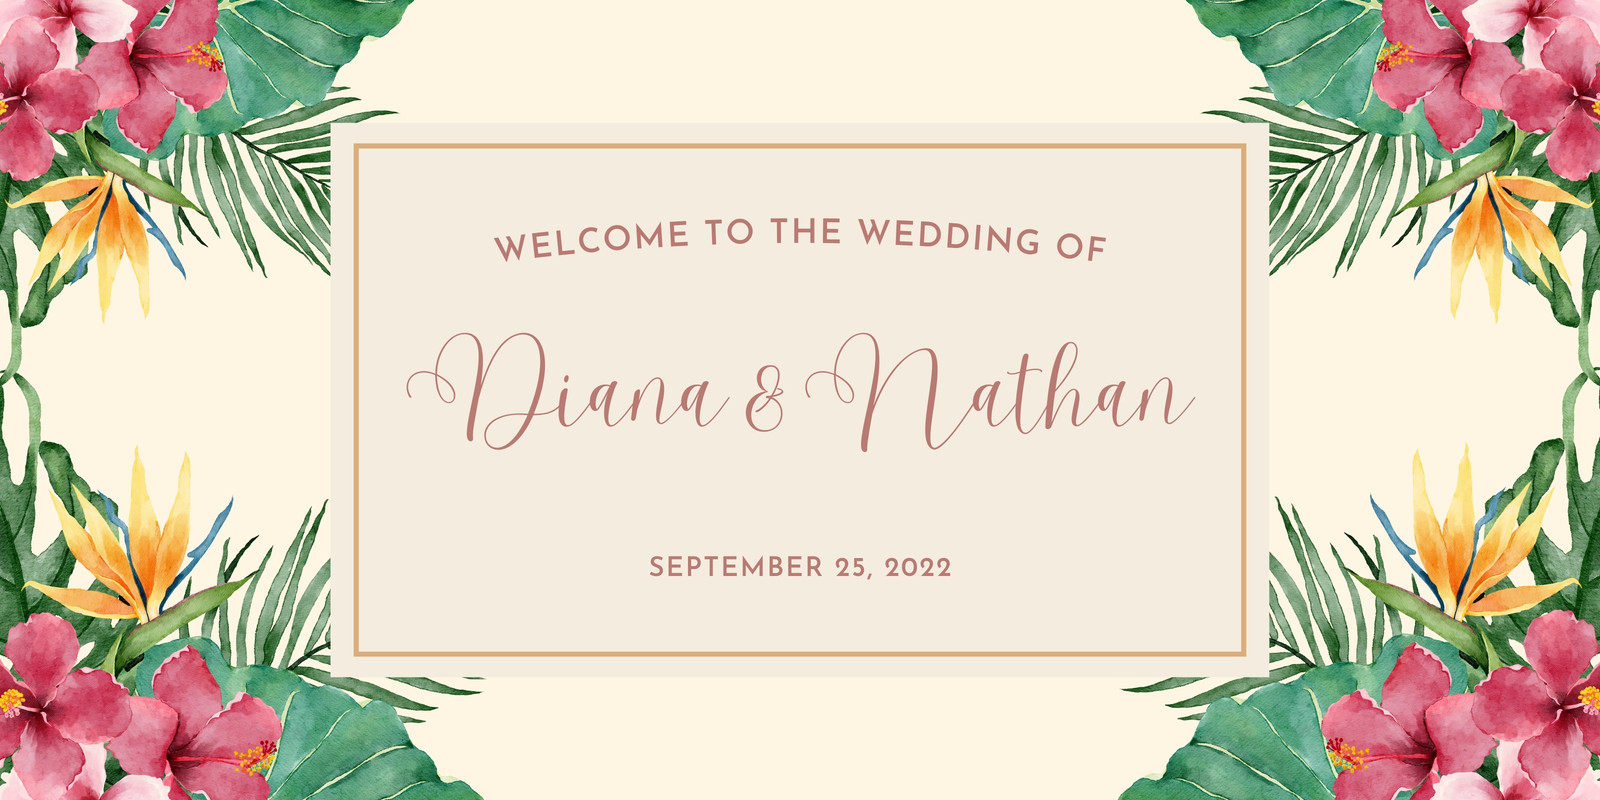 Page 6 - Free customizable wedding banner templates | Canva